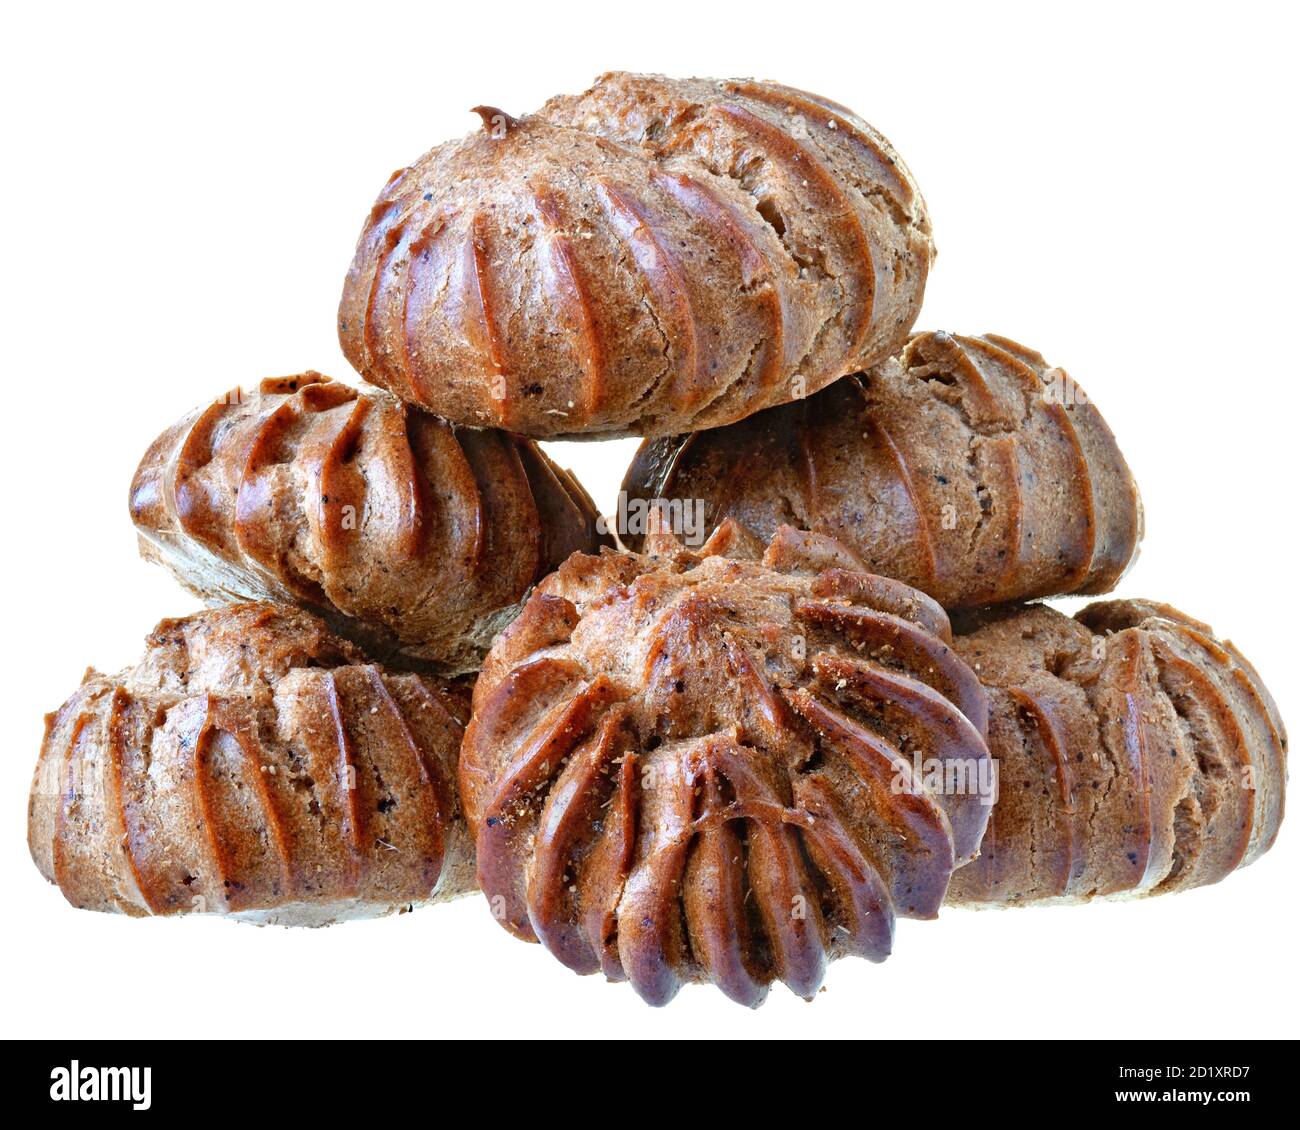 Heap of freshly baked brown eclairs isolated on a white background. Stock Photo